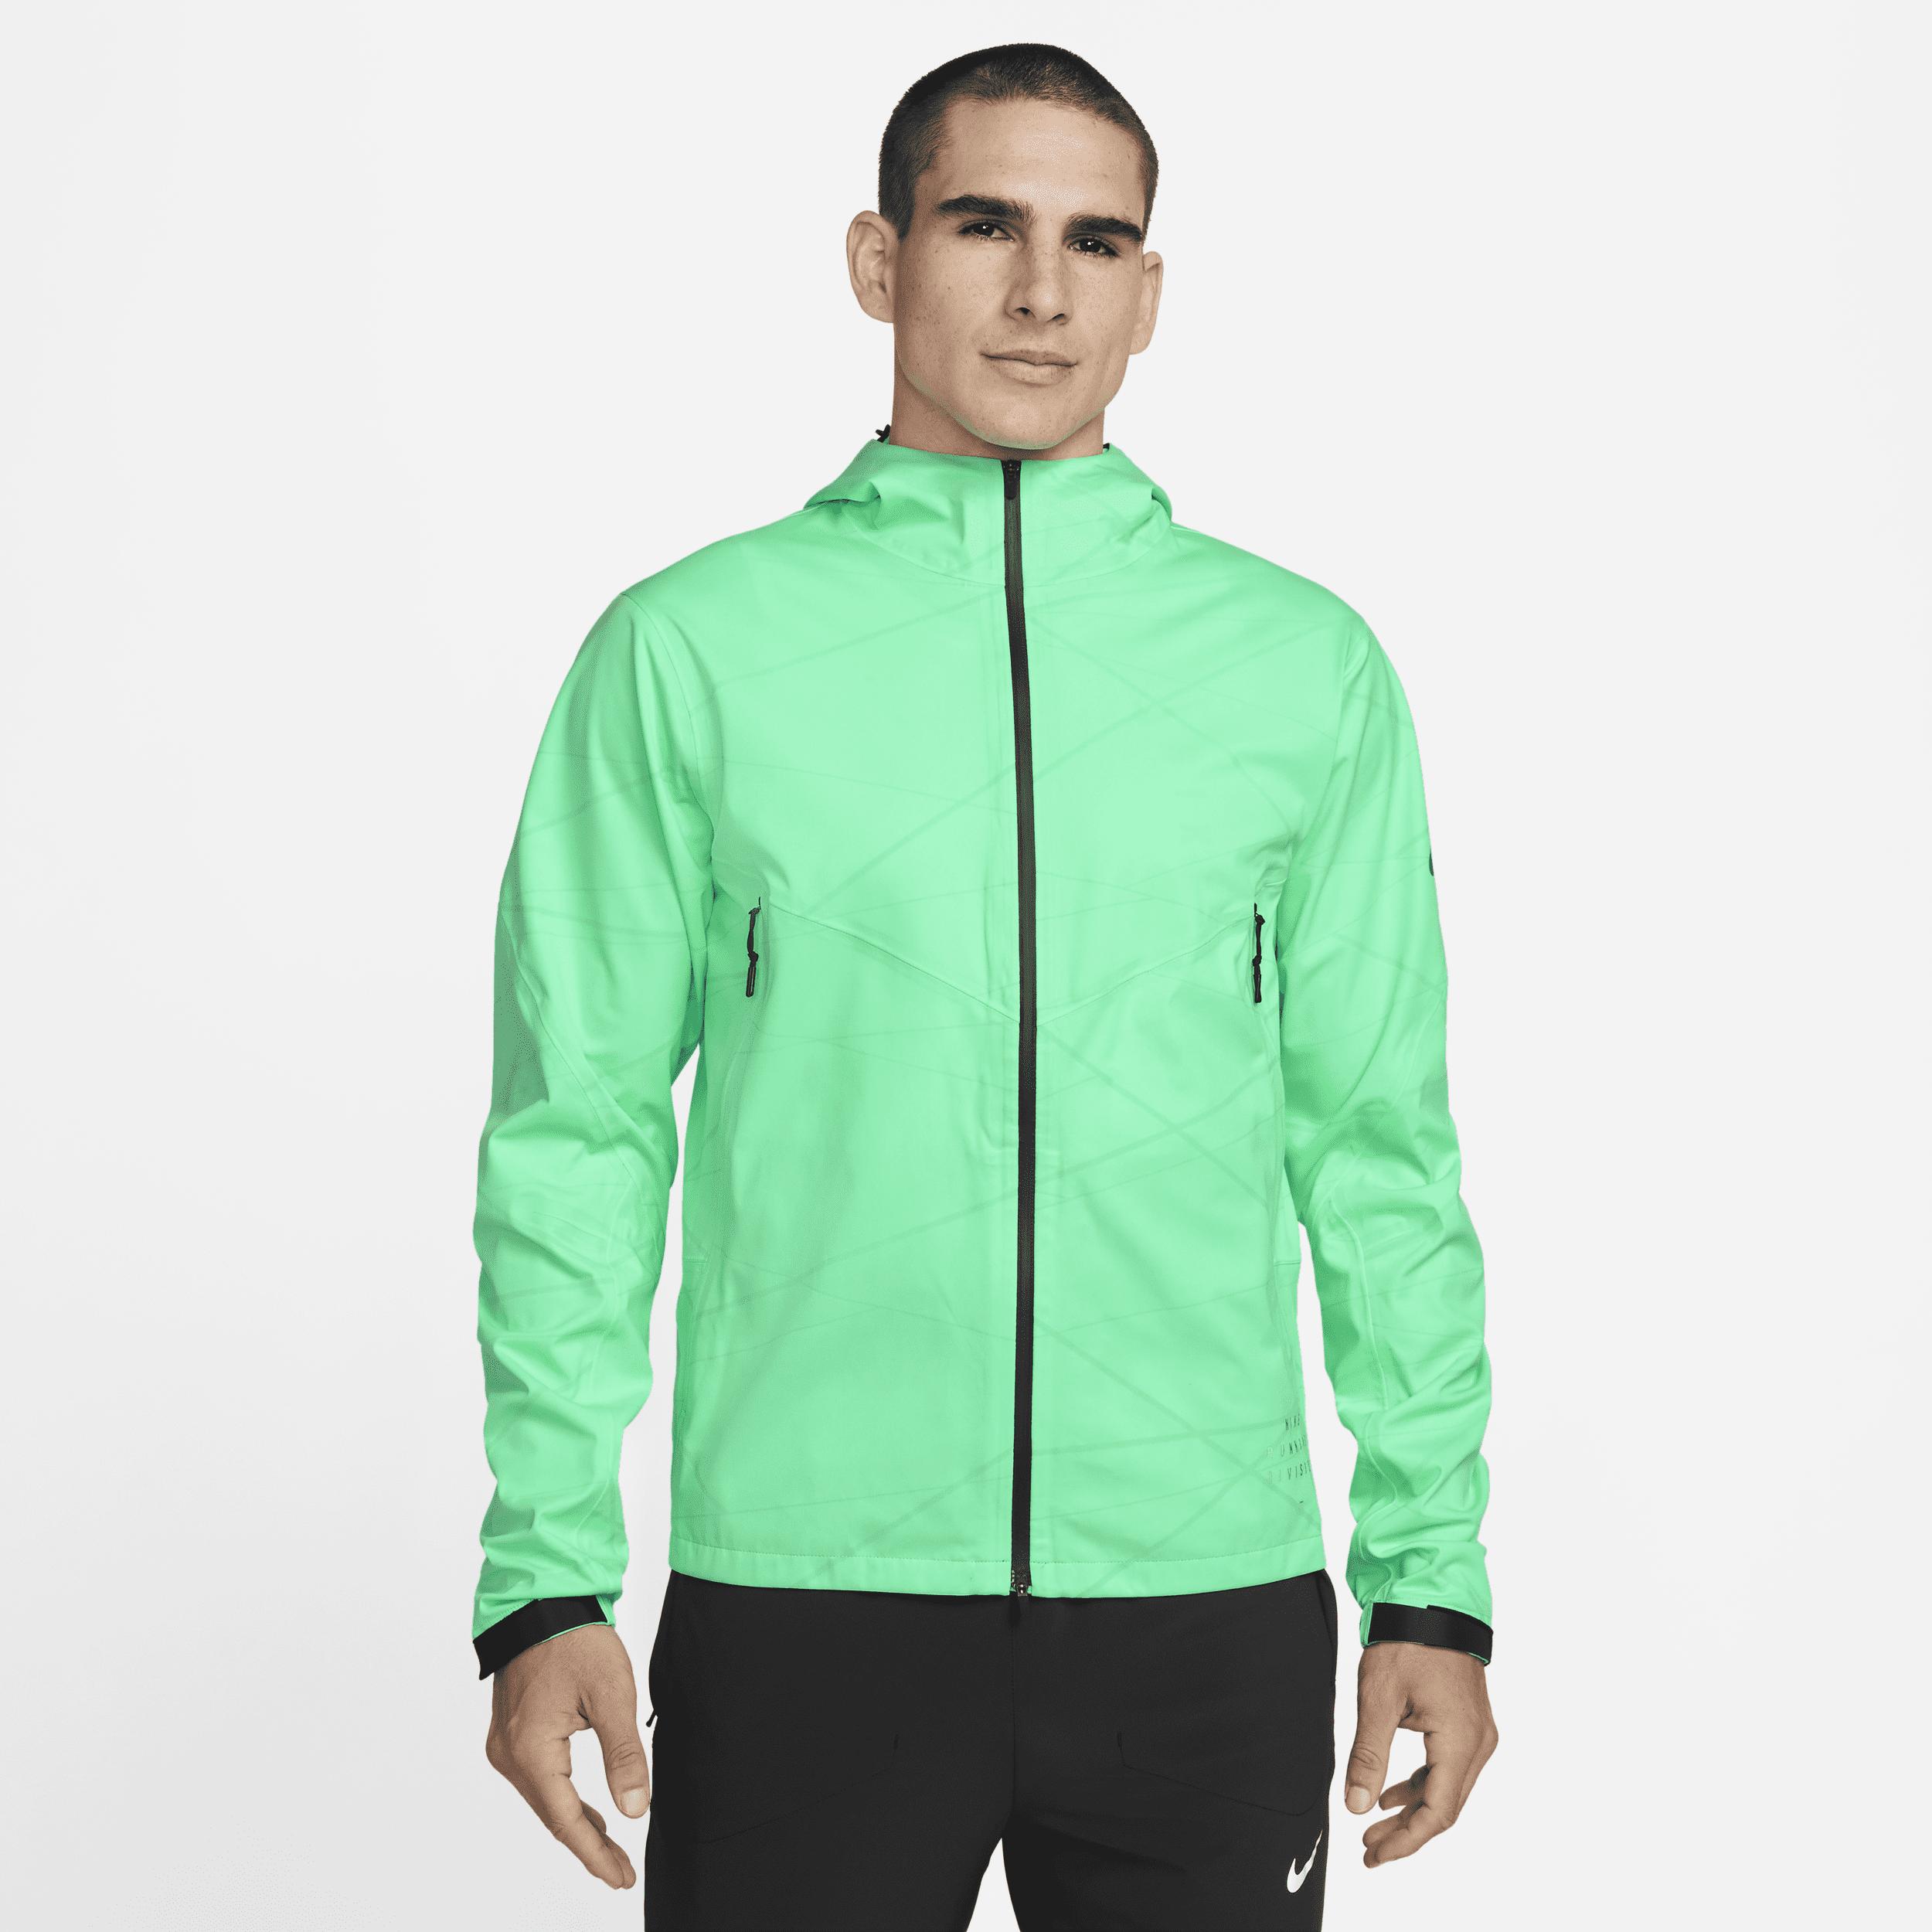 Nike Storm-fit Run Division Running Jacket In Green, for Men | Lyst